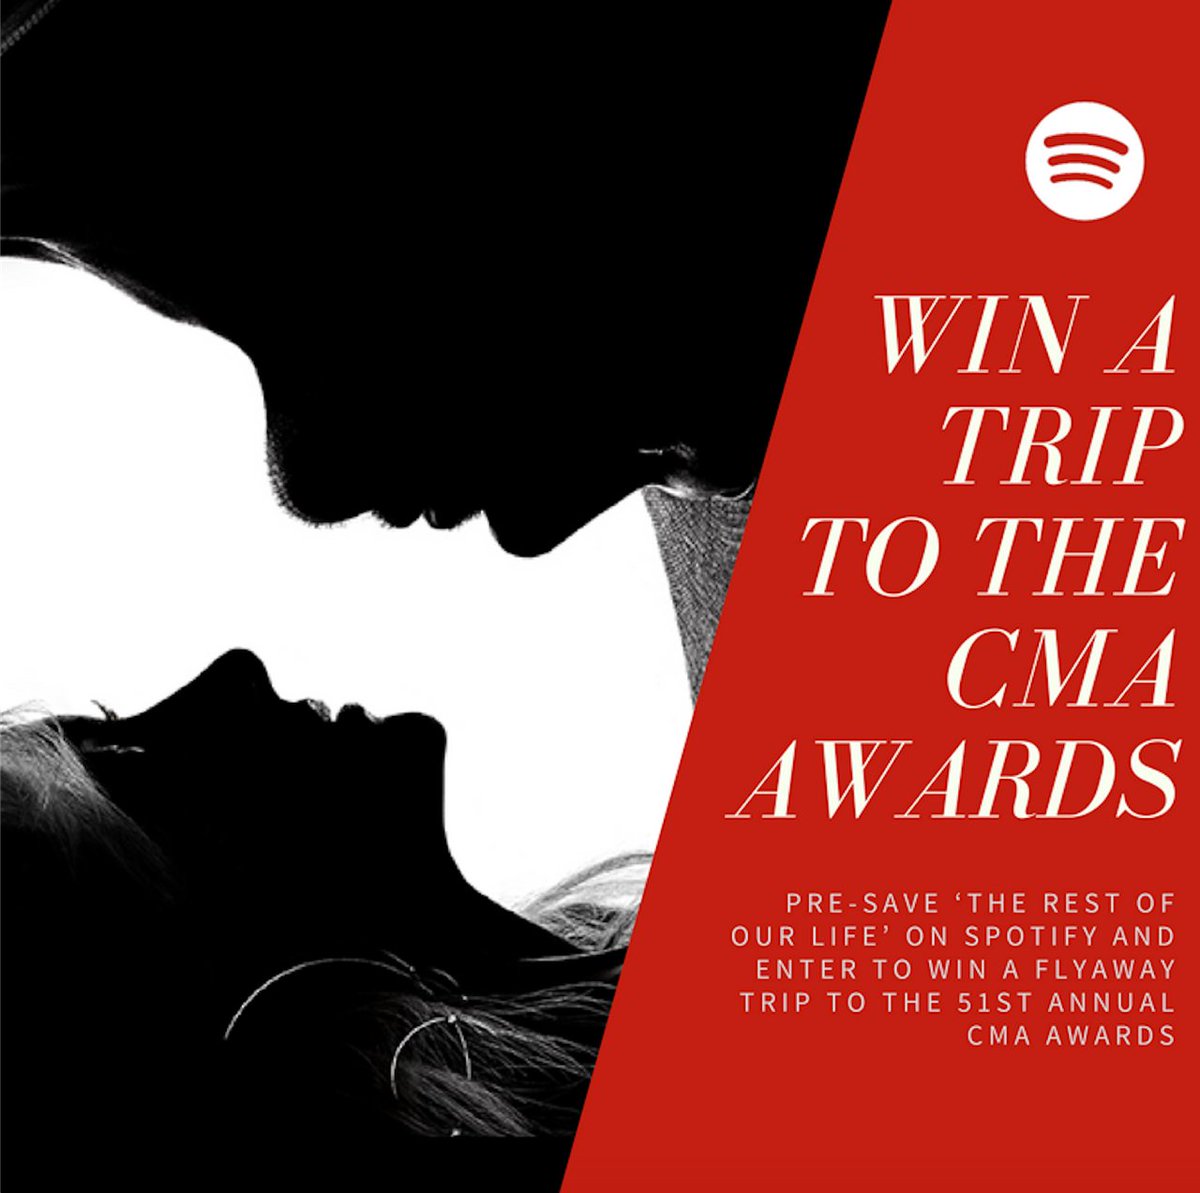 Pre-save on @Spotify and enter to win a trip to the 2017 CMA awards! #TheRestOfOurLife https://t.co/84RAF6YHv1 https://t.co/uO4Zsi4Db0